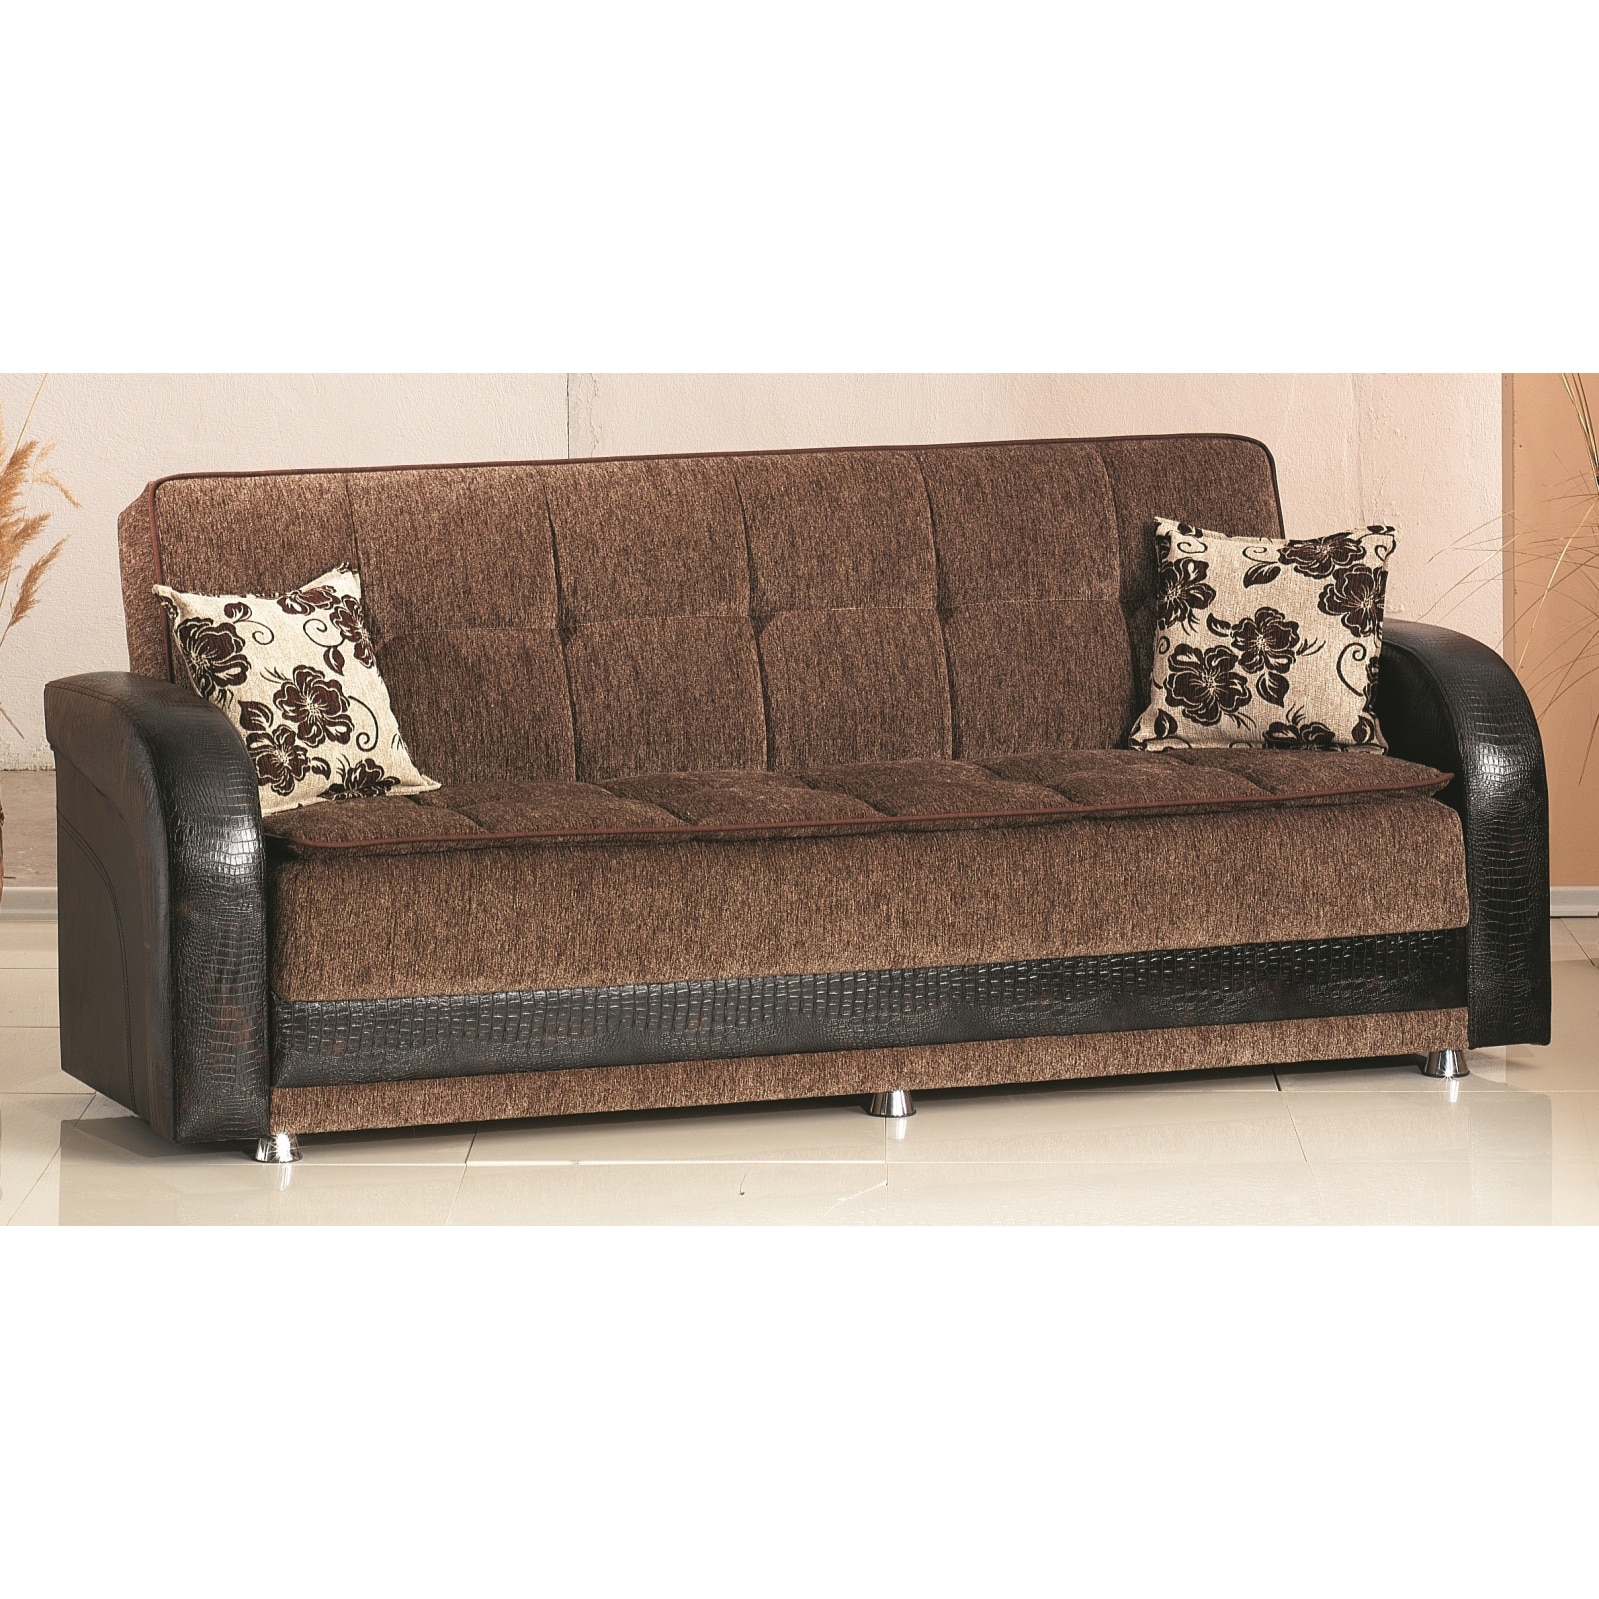 Utica Brown Bicast Leather And Fabric Sofa Bed (Wood, metal, vinylFinish MetalUpholstery material Bi cast leather, fabricUpholstery color BrownIncludes storage compartmentSeat height 18 inchesSofa dimensions 21 inches tall x 75 inches wide x 21 inche